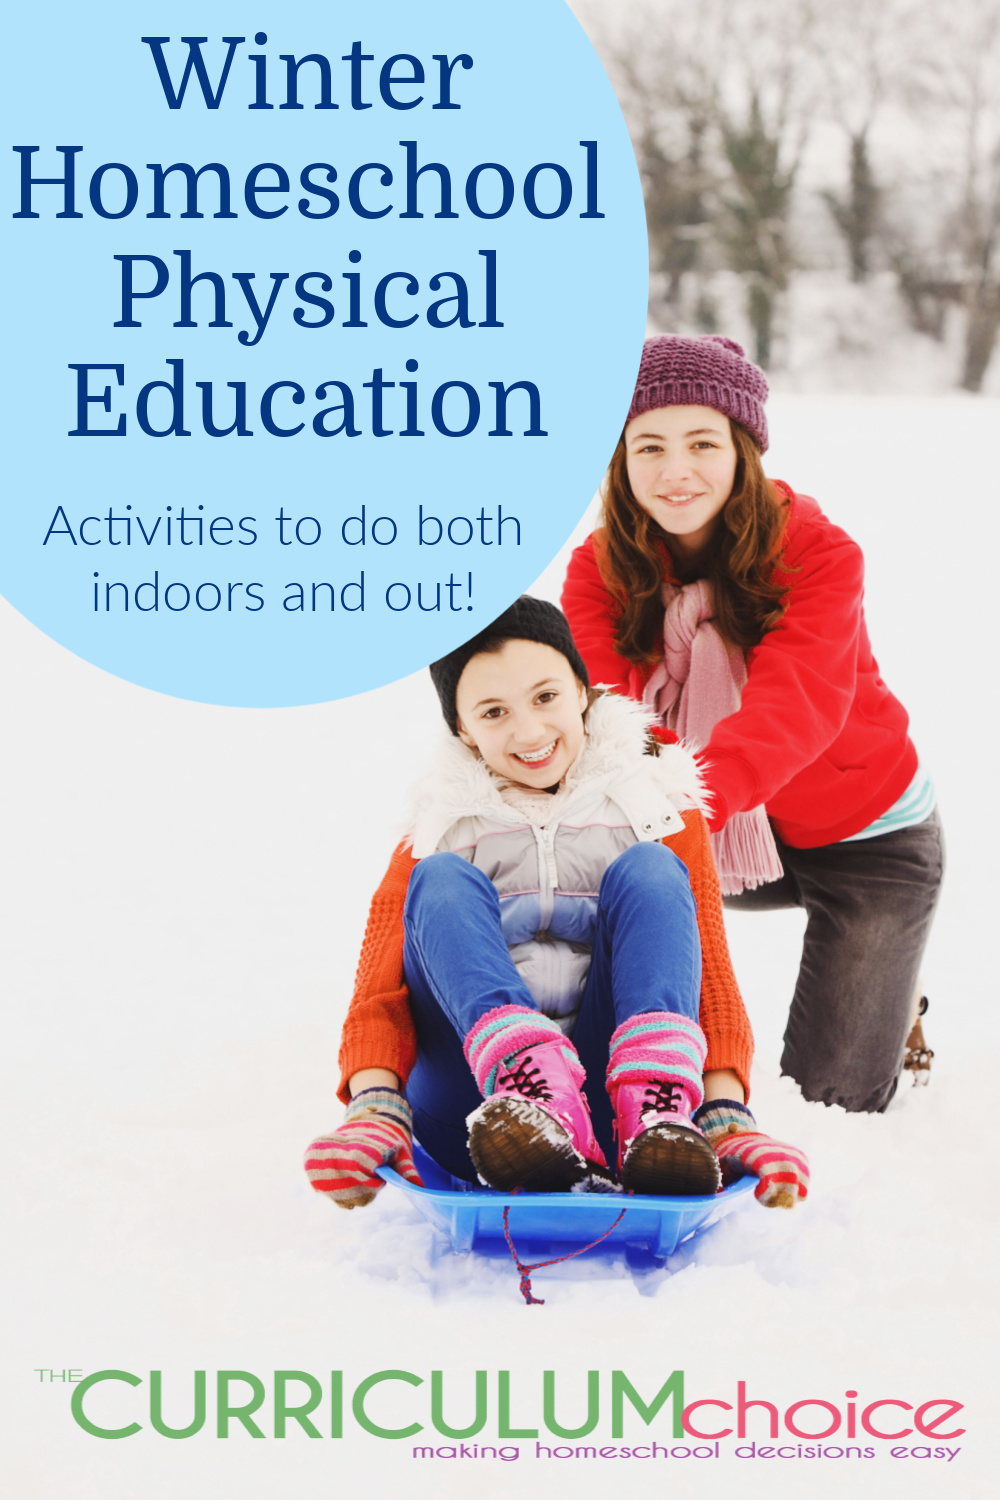 Winter homeschool physical education can include both indoor and outdoor activities. Yes! You can do outdoor PE in the winter! Everything from ice skating and snow shoeing outside, to dance parties, and exercise videos inside!